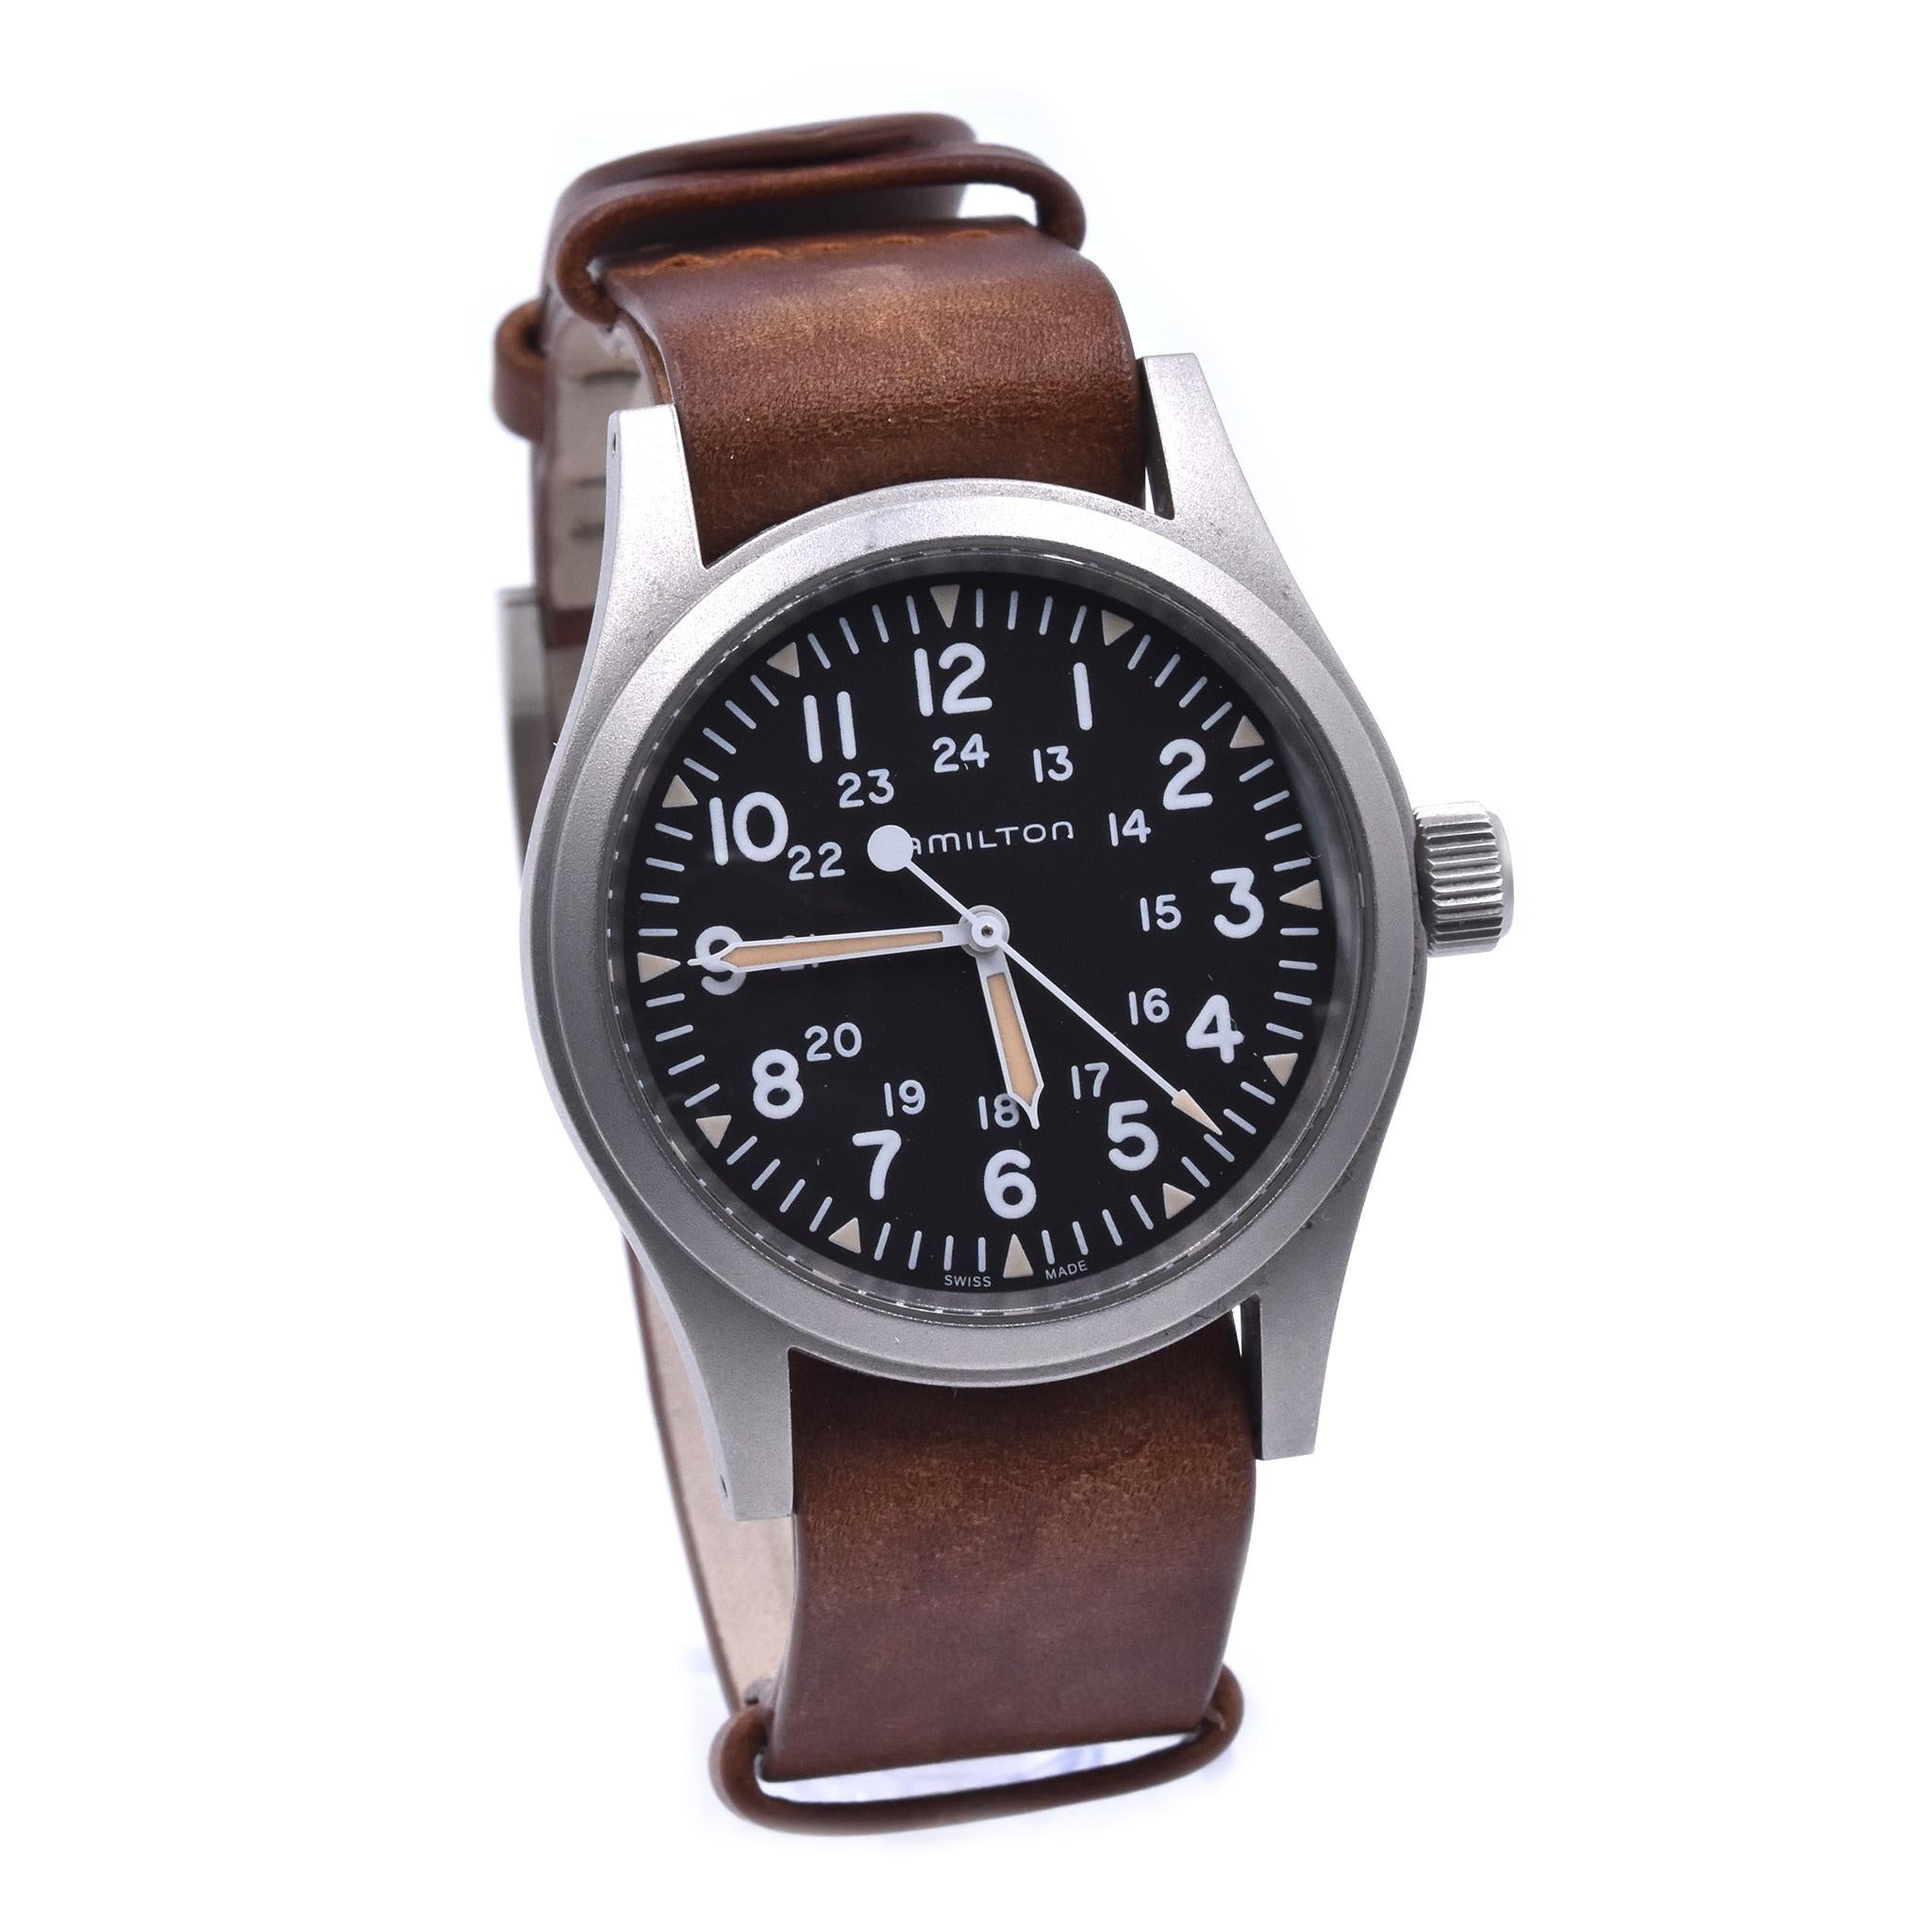 Movement: manual wind
Function: hours, minutes
Case: 14.20mm x 18mm case, diamonds set in case
Dial: black dial, arabic numerals
Band: brown leather strap with buckle
Serial # NCWEJZXXX
Reference # H694390

Does not come with original box or